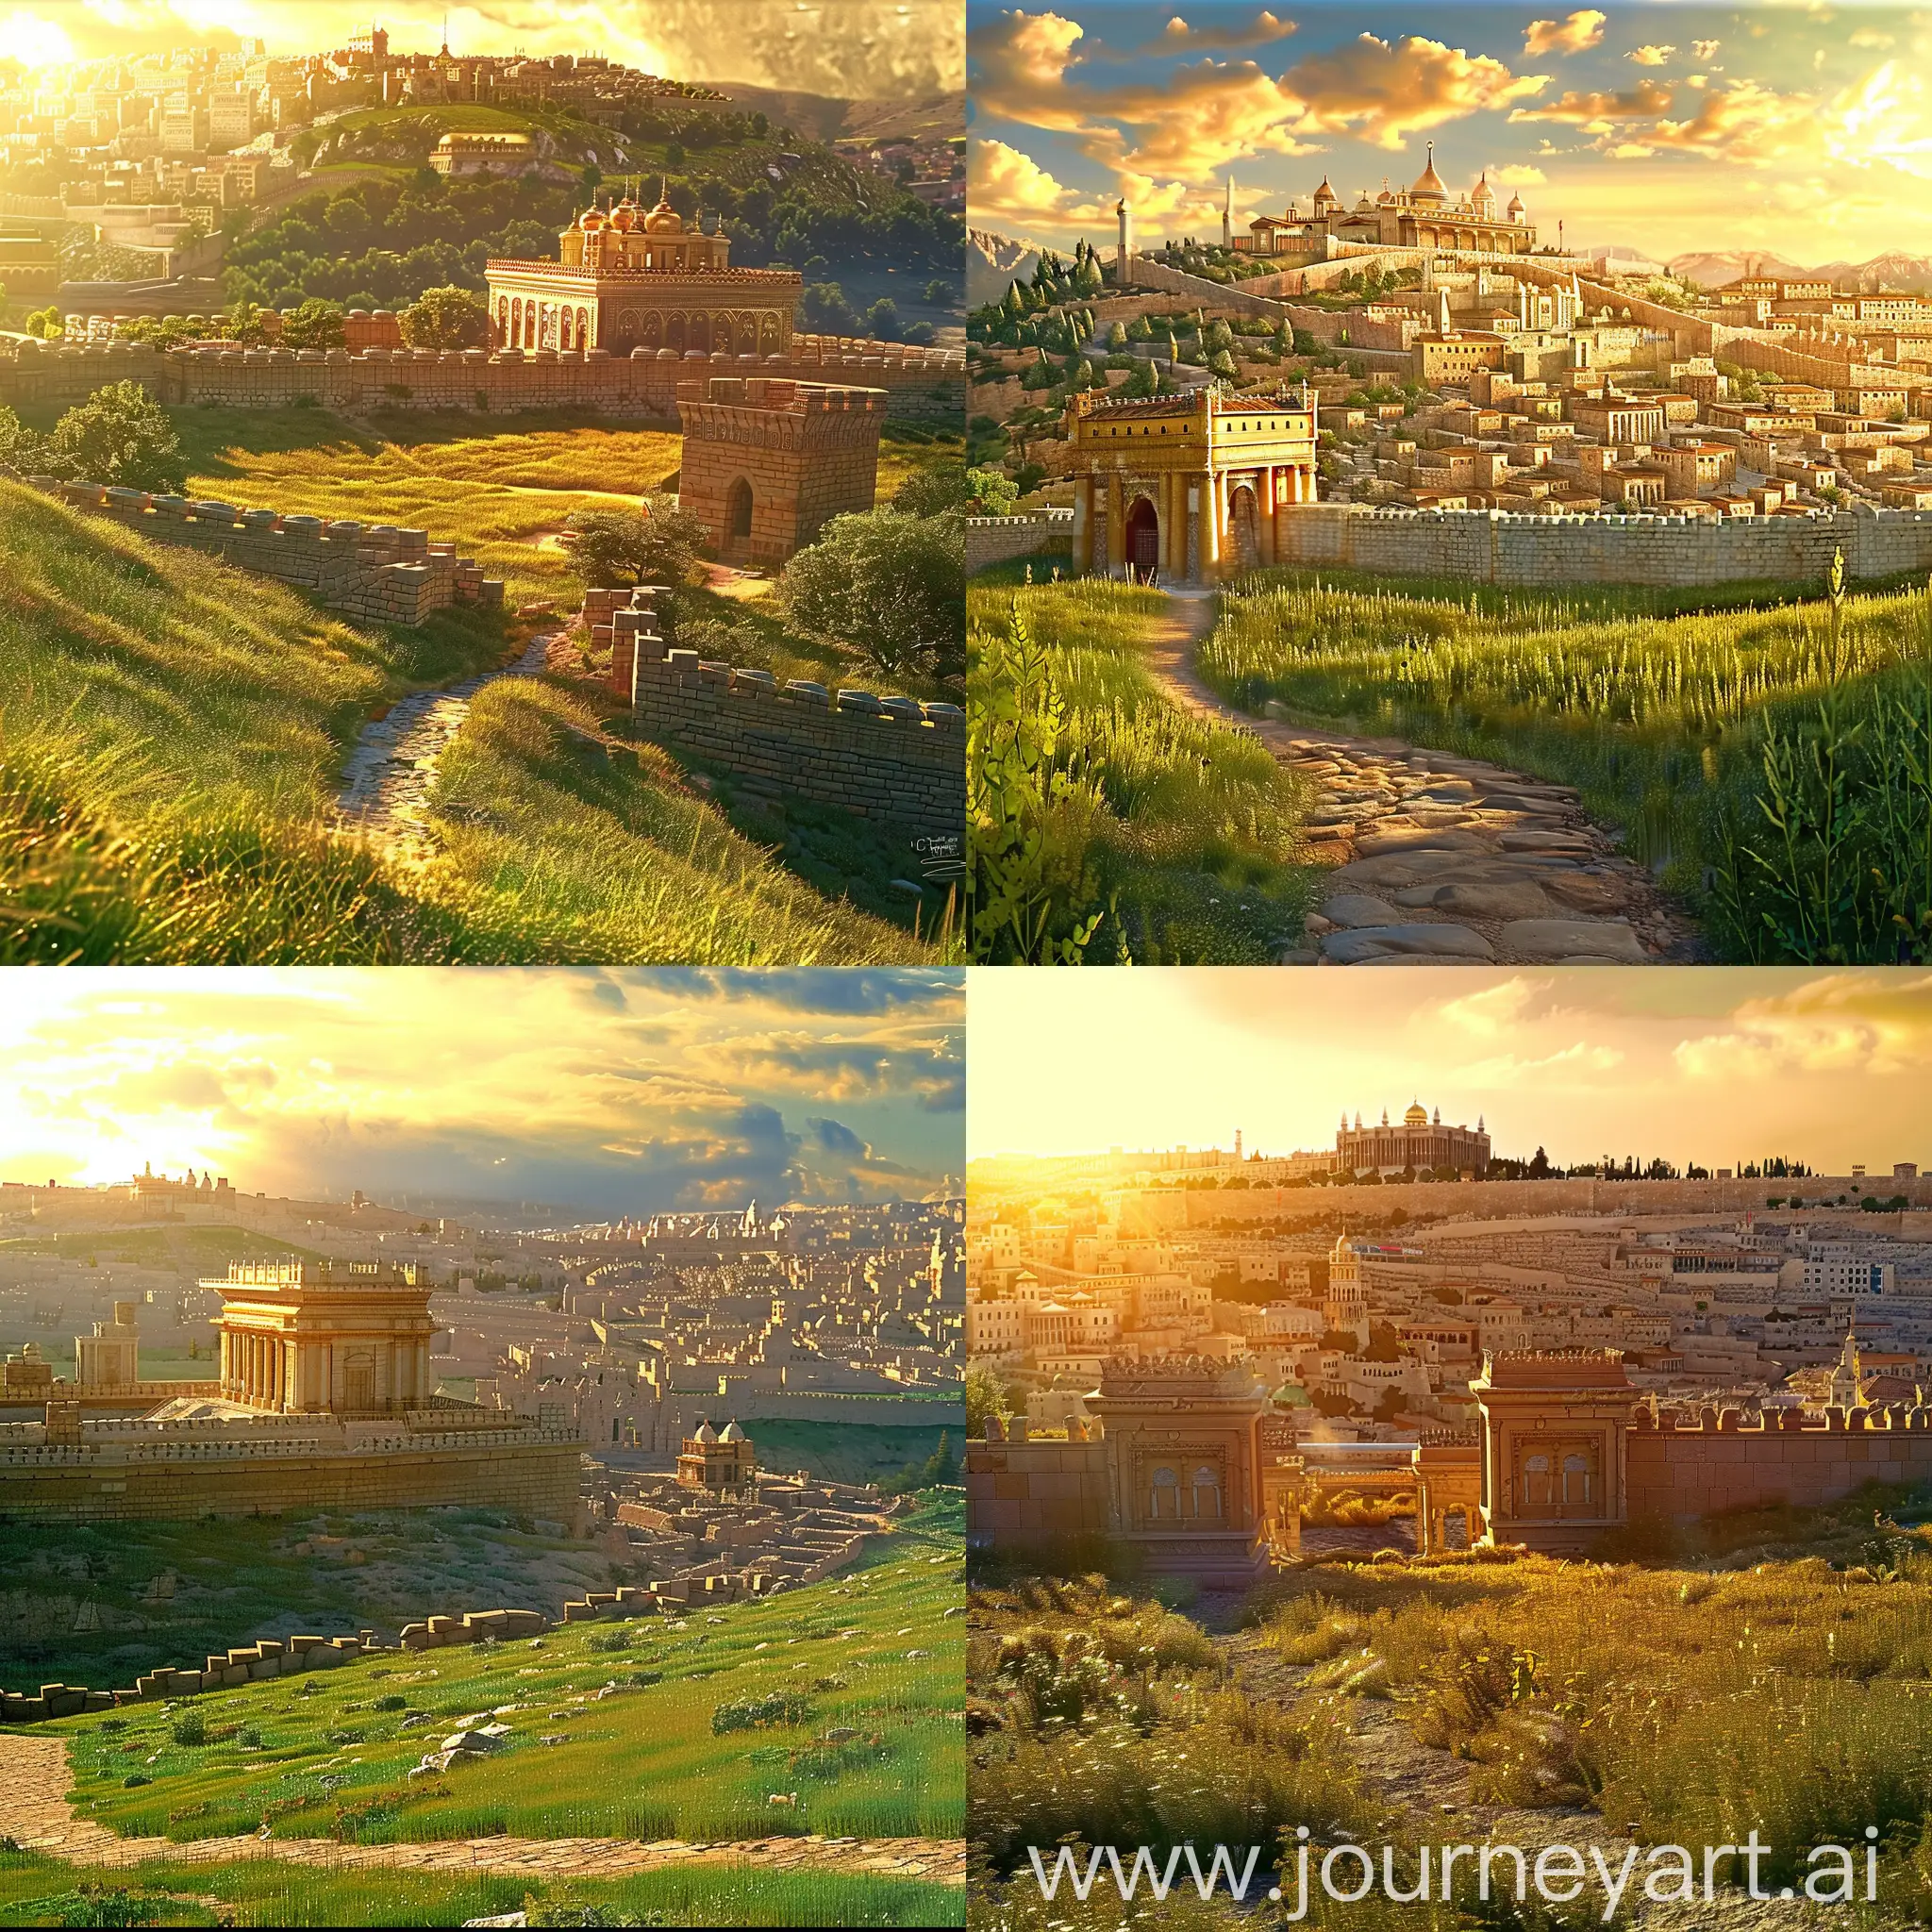 view from the hill to the eastern city at the bottom of the hill is a field with green grass, a path leads to the ancient eastern city. the city is illuminated by sunlight in the distance.  in the style of the muttfilm of Zveropolis